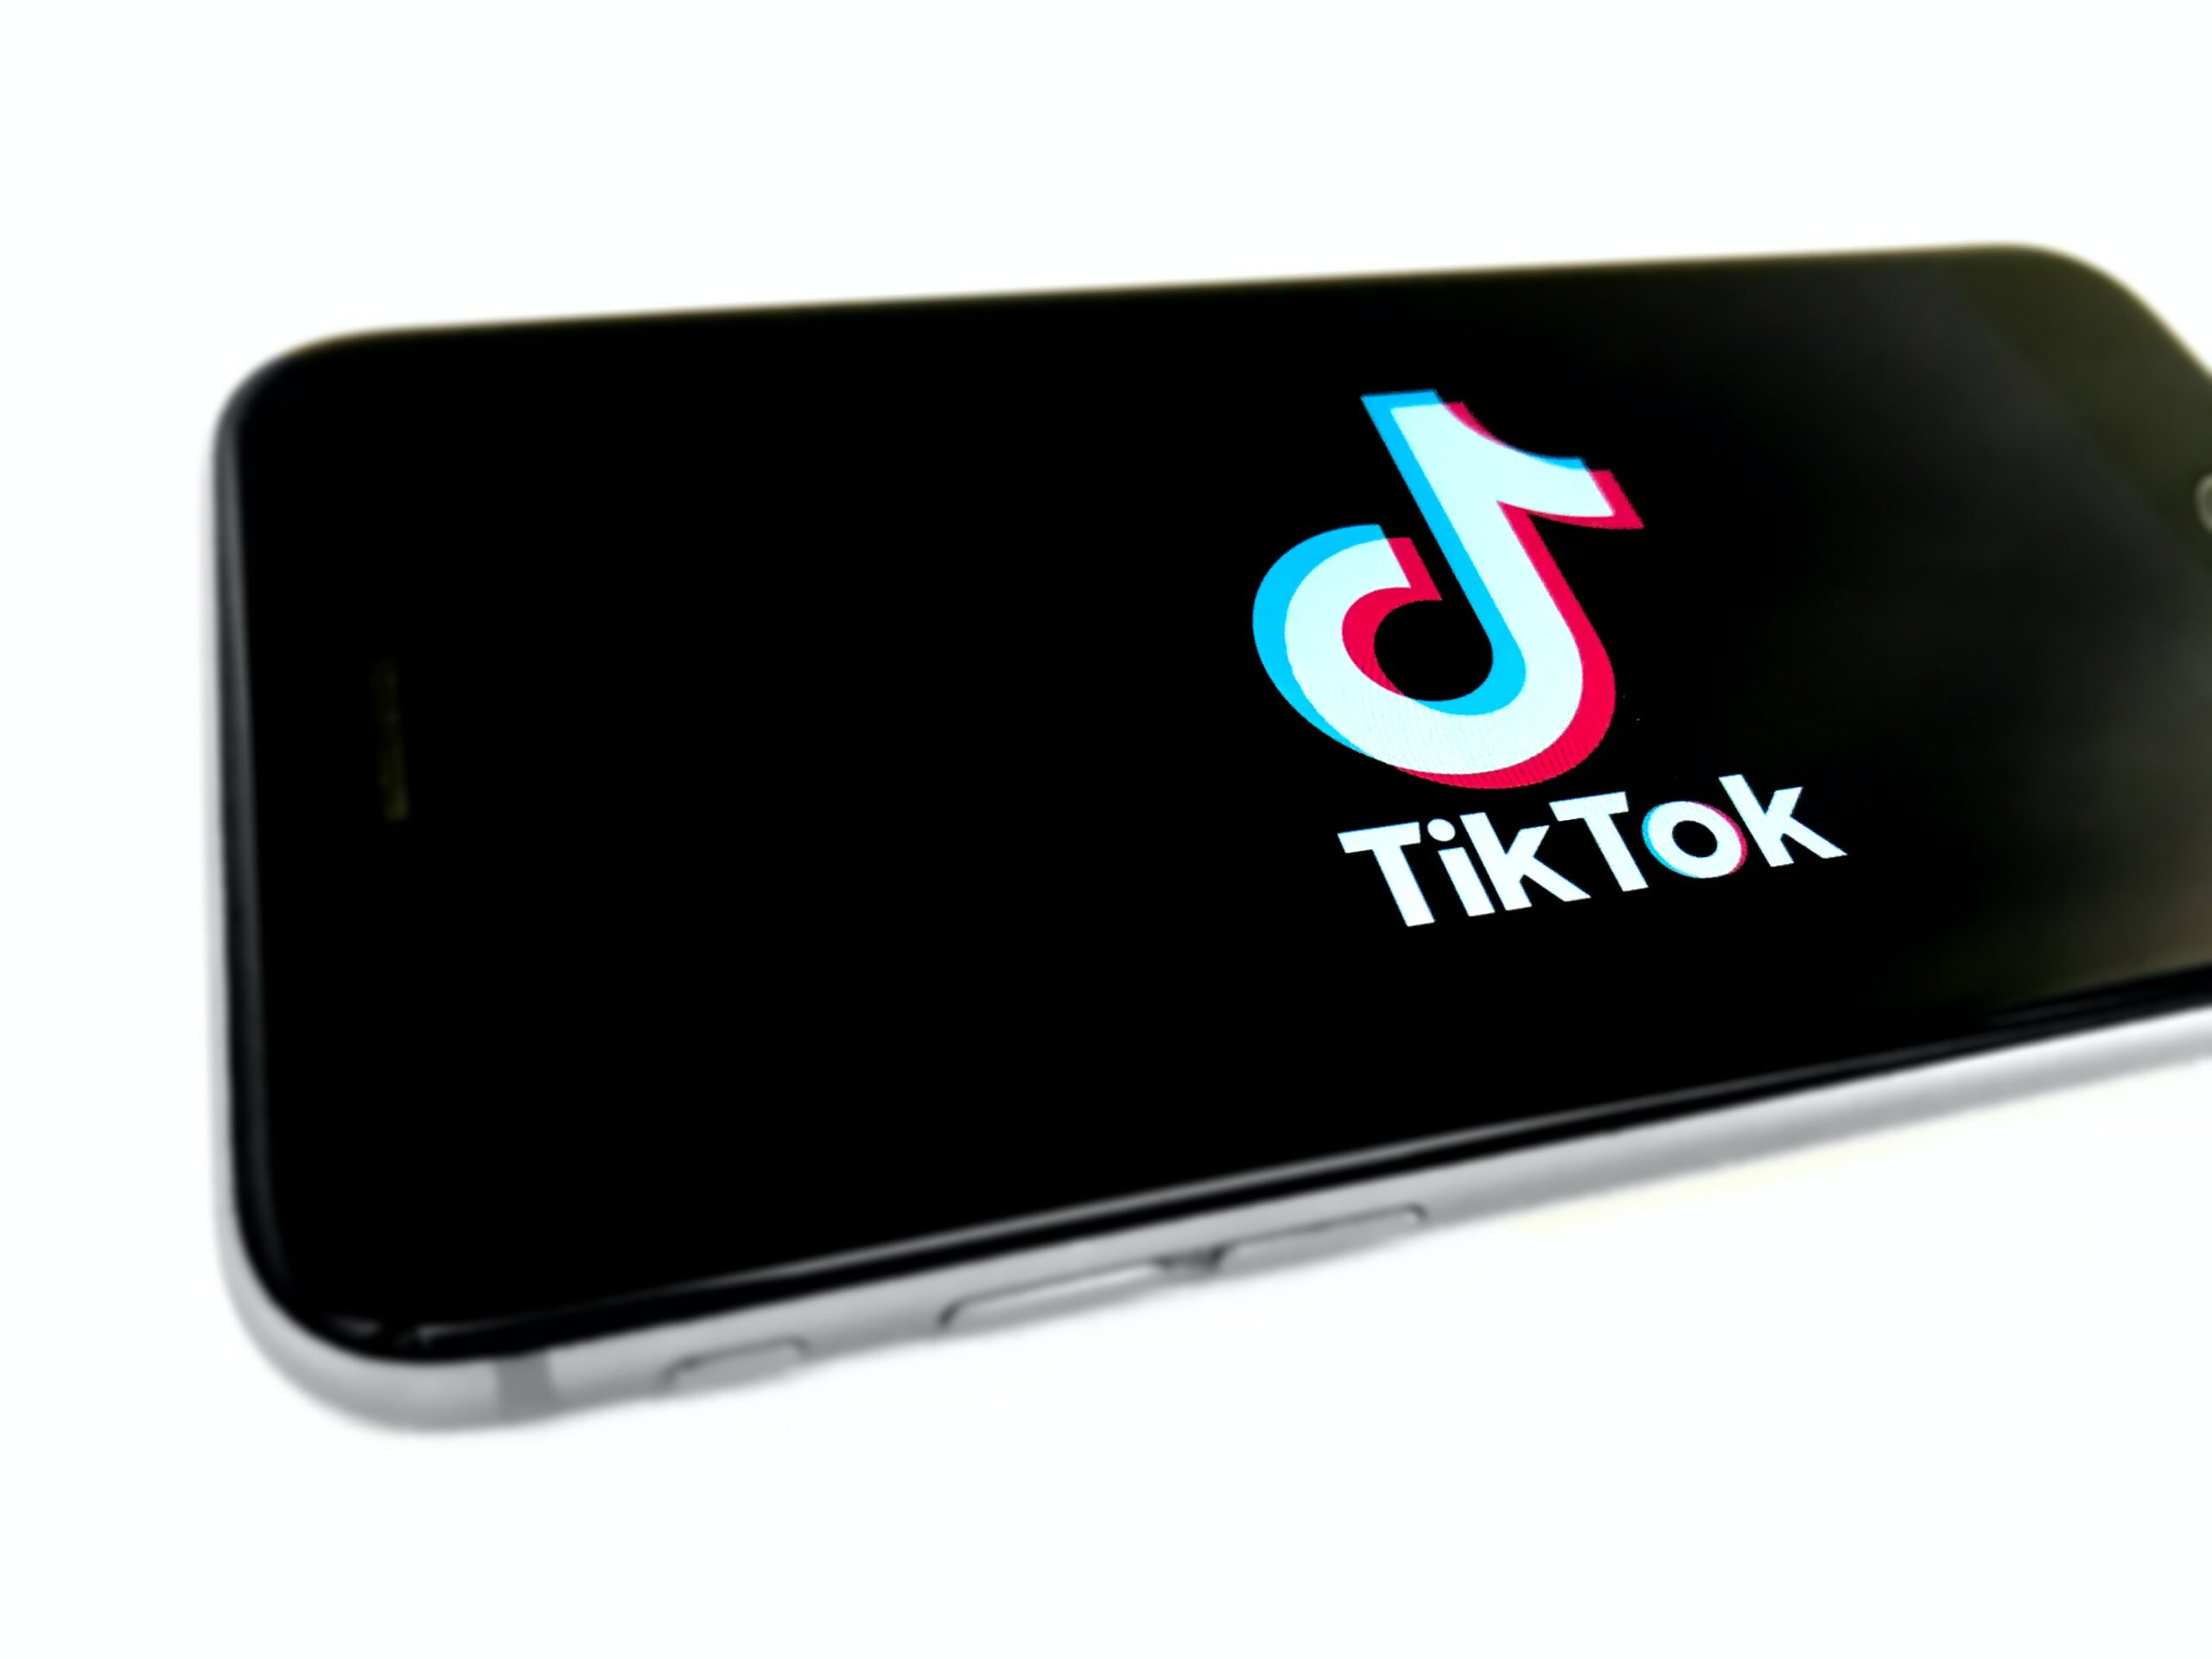 A mobile phone with TikTok logo on the screen